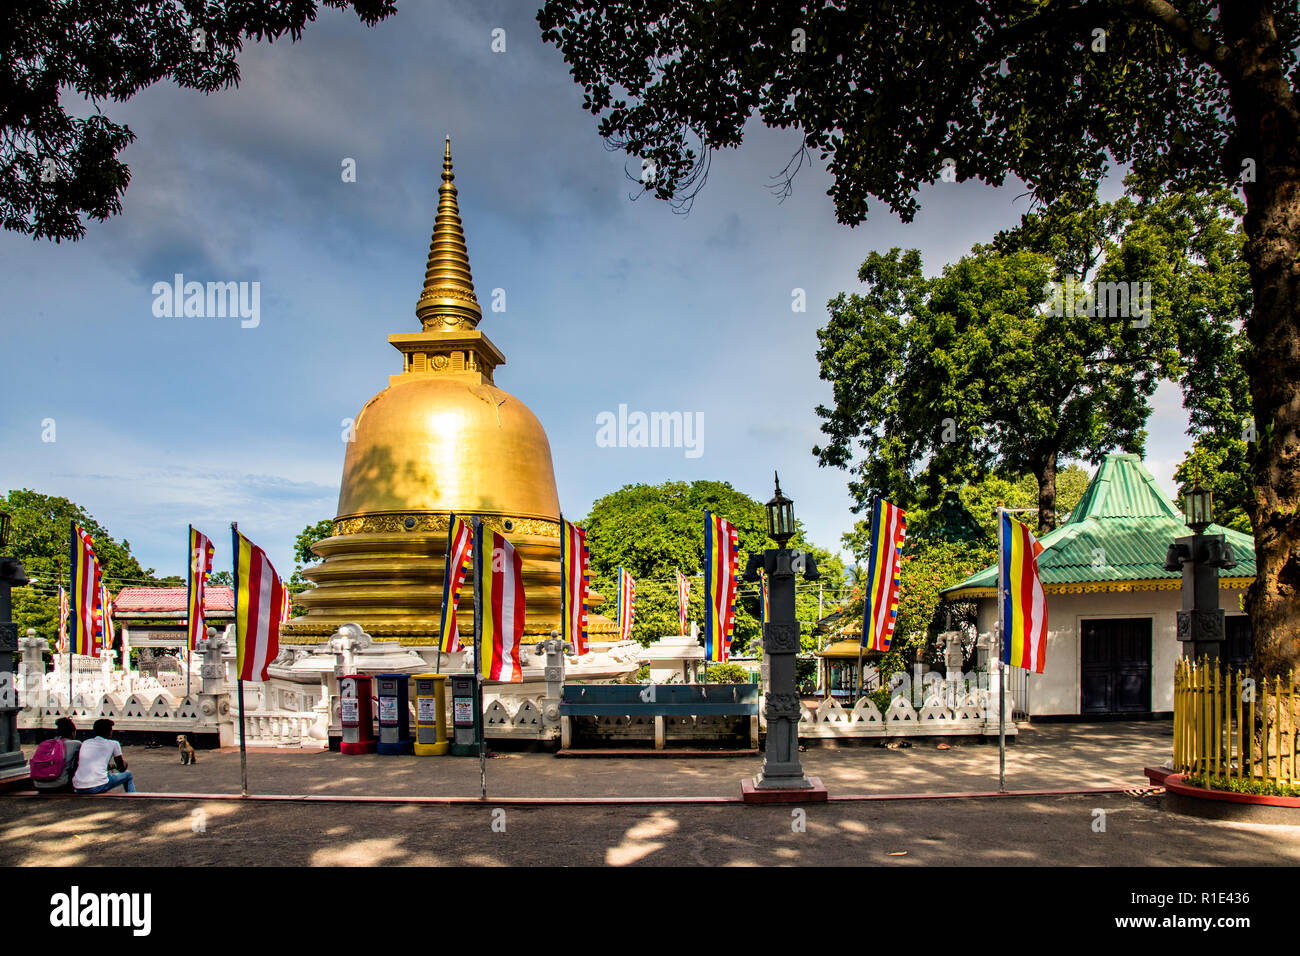 Dambulla Cave Temple, Sri Lanka. The typical Buddhism flags fly around the pagoda of the Golden Temple of Dambulla Stock Photo